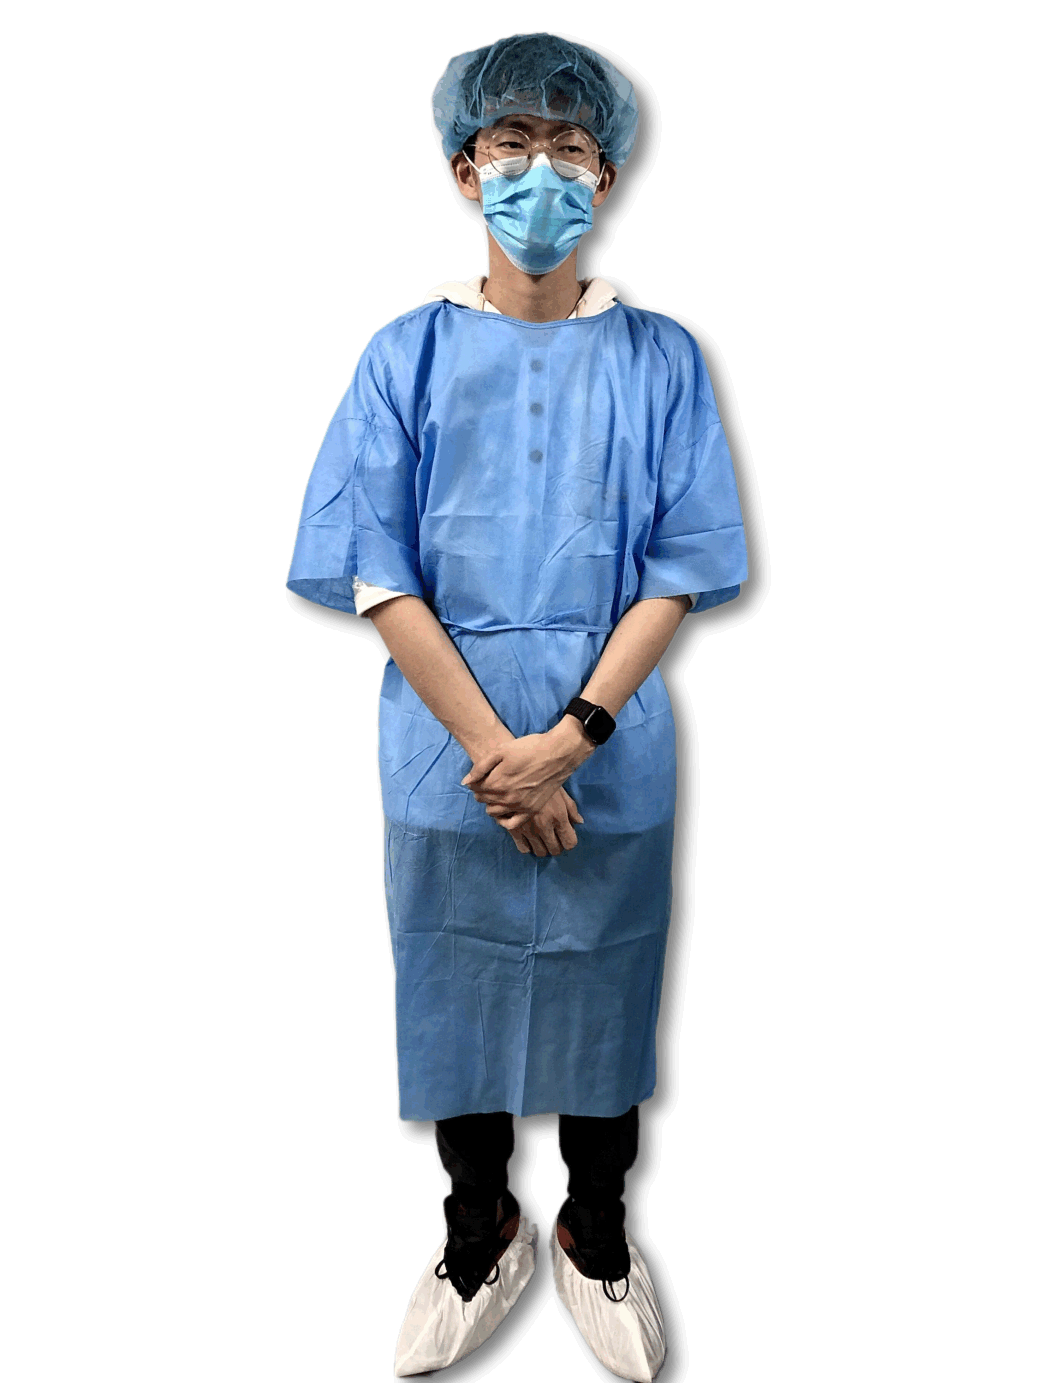 Blue Scrub Suits Non Woven Nursing Uniforms Waterproof and Easy-Breath with Short Sleeves